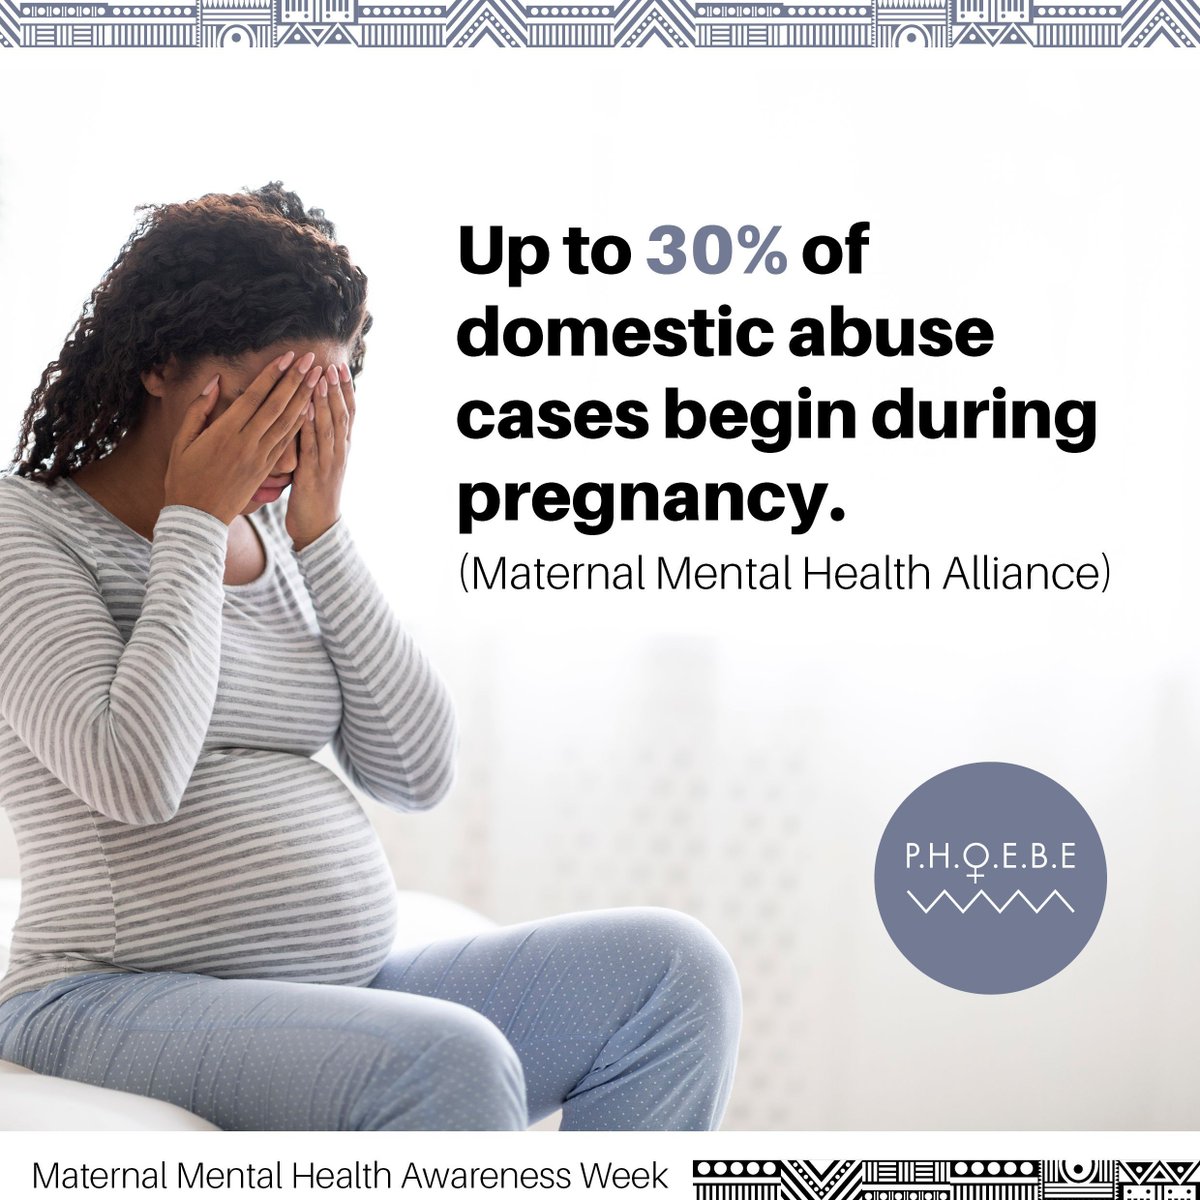 Women who experience domestic abuse are twice as likely to experience depression, making the already challenging maternity experience even more taxing on mothers' mental well-being. 
#MaternalMentalHealthWeek #EndVAWG